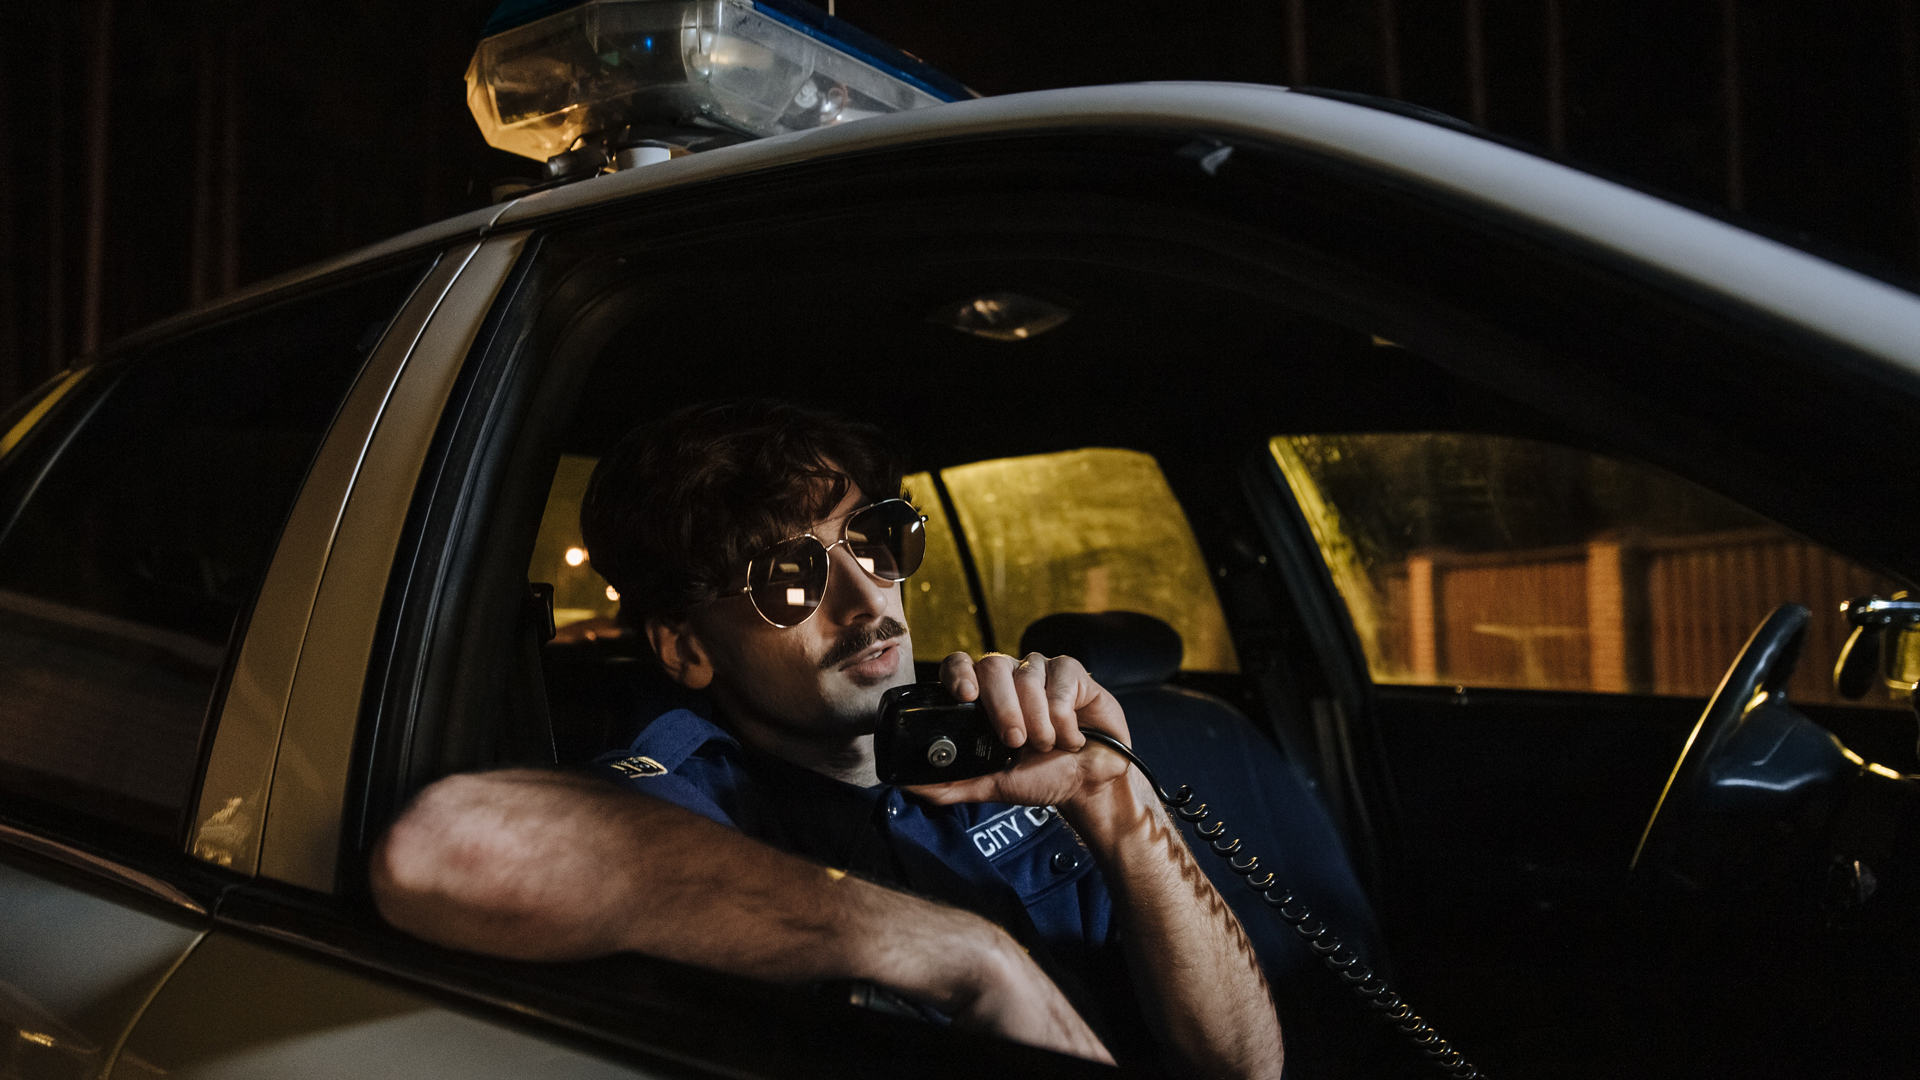 A photo of a police officer calling into dispatch on their cruiser's CB radio.